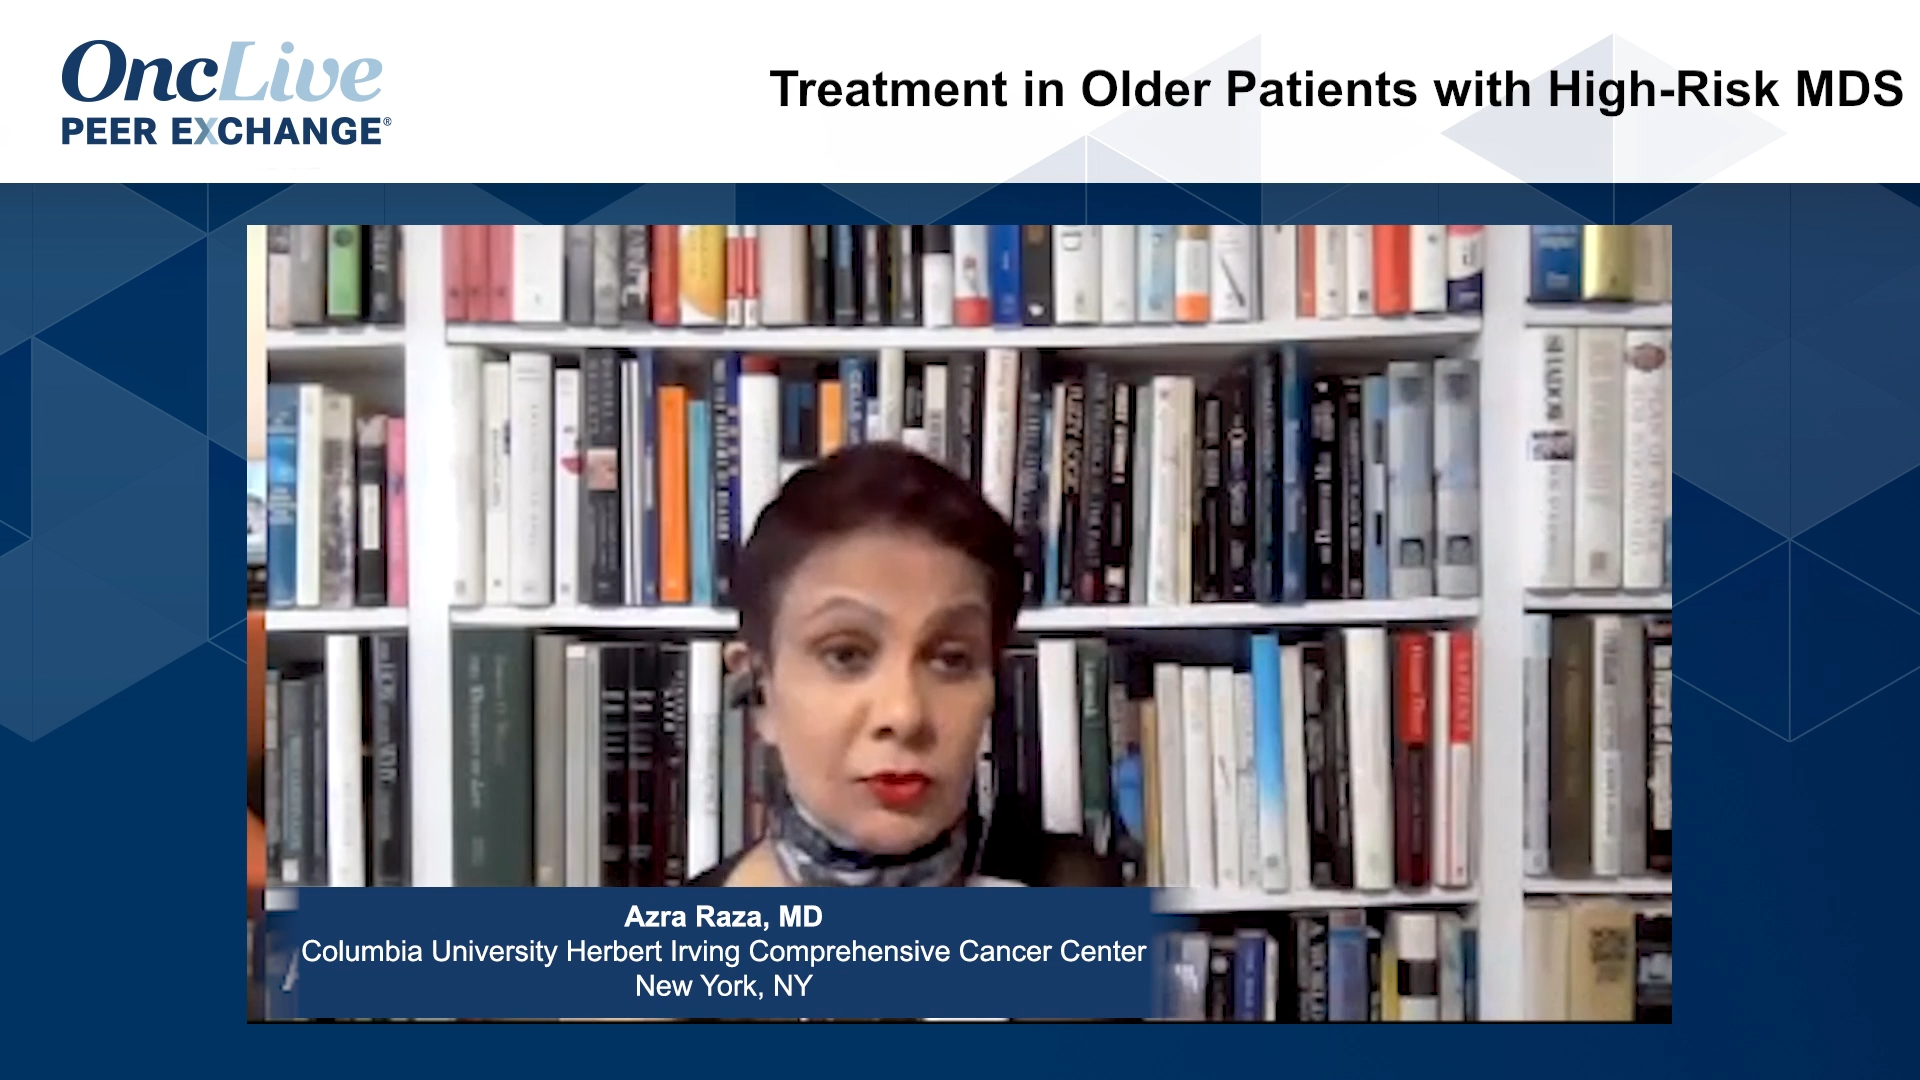 Treatment in Older Patients with High-Risk MDS